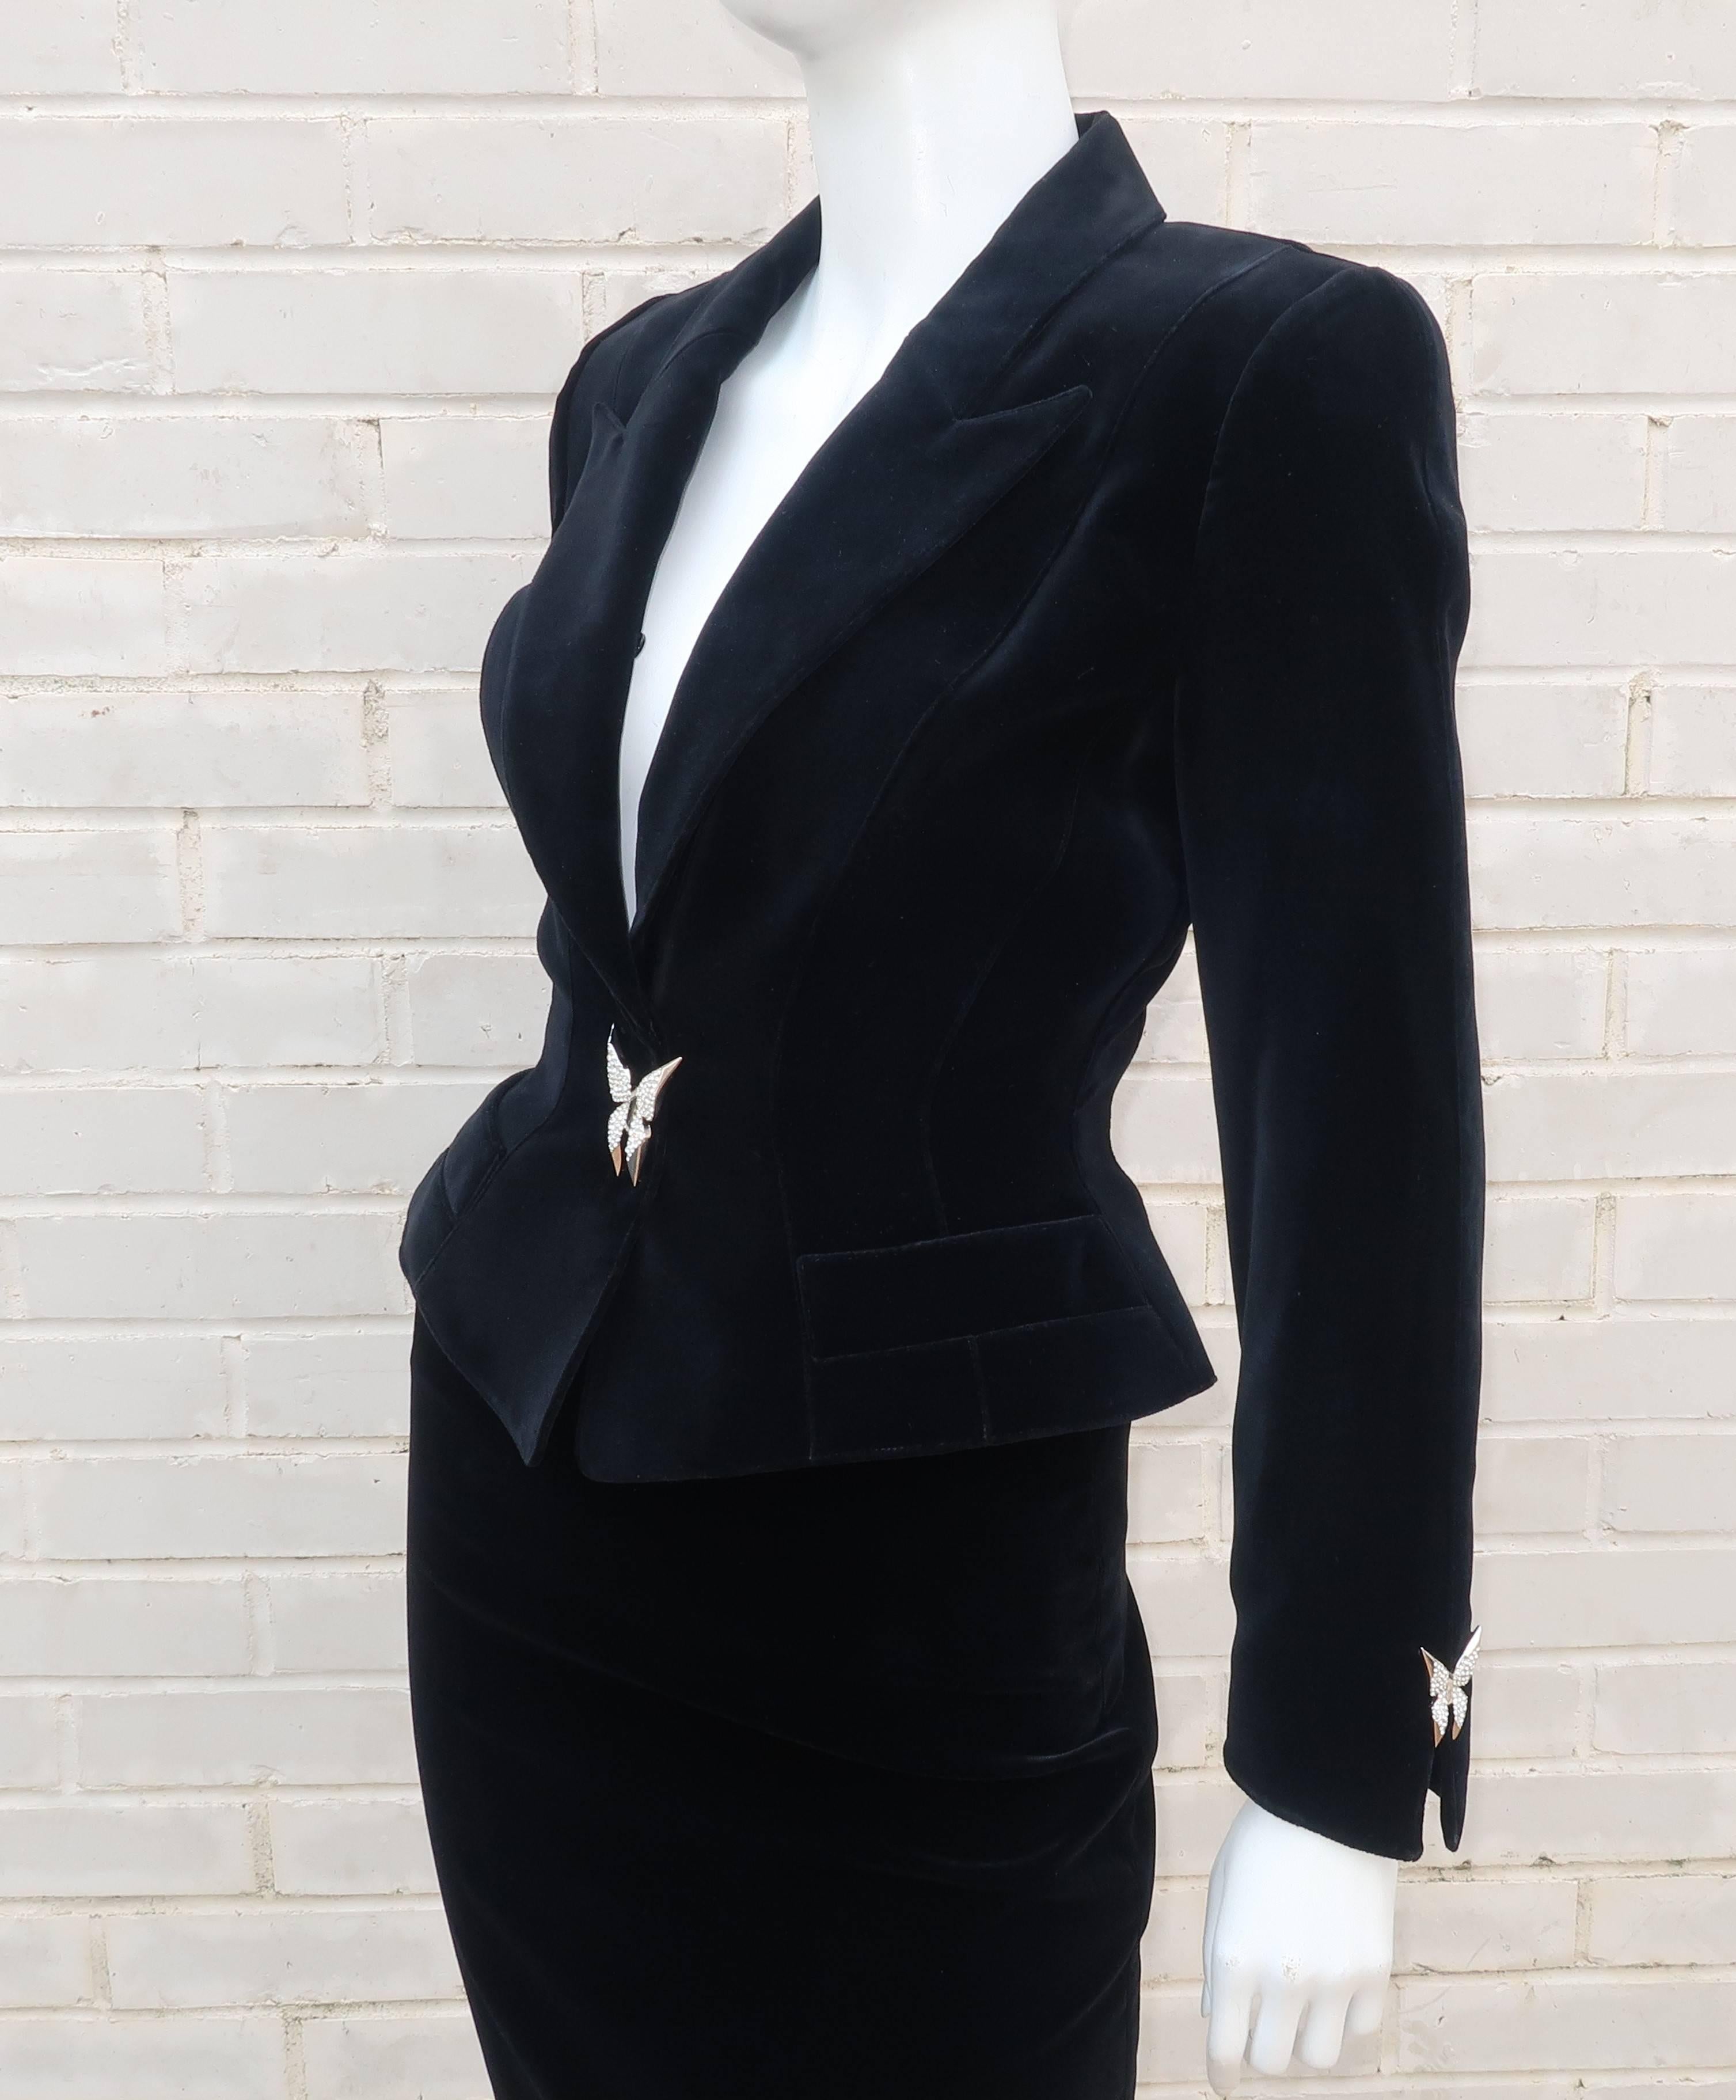 French designer Thierry Mugler is a master of the innovative suit combining style details from the 1940's with a futuristic silhouette which honors the strong feminine form. This gorgeous wasp waist black evening suit incorporates the tactile